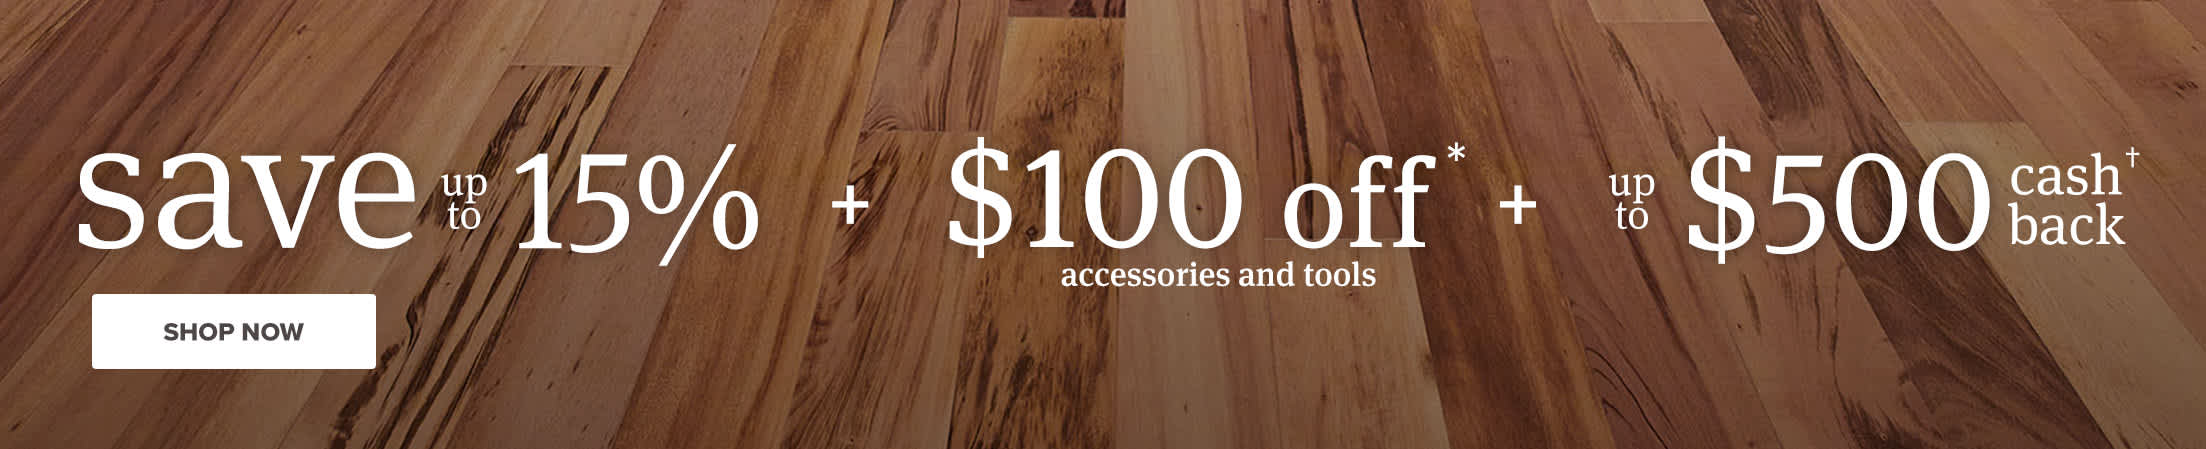 save up to 15 percent plus 100 dollars off accessories and tools plus  up to 500 dollars cash back shop now